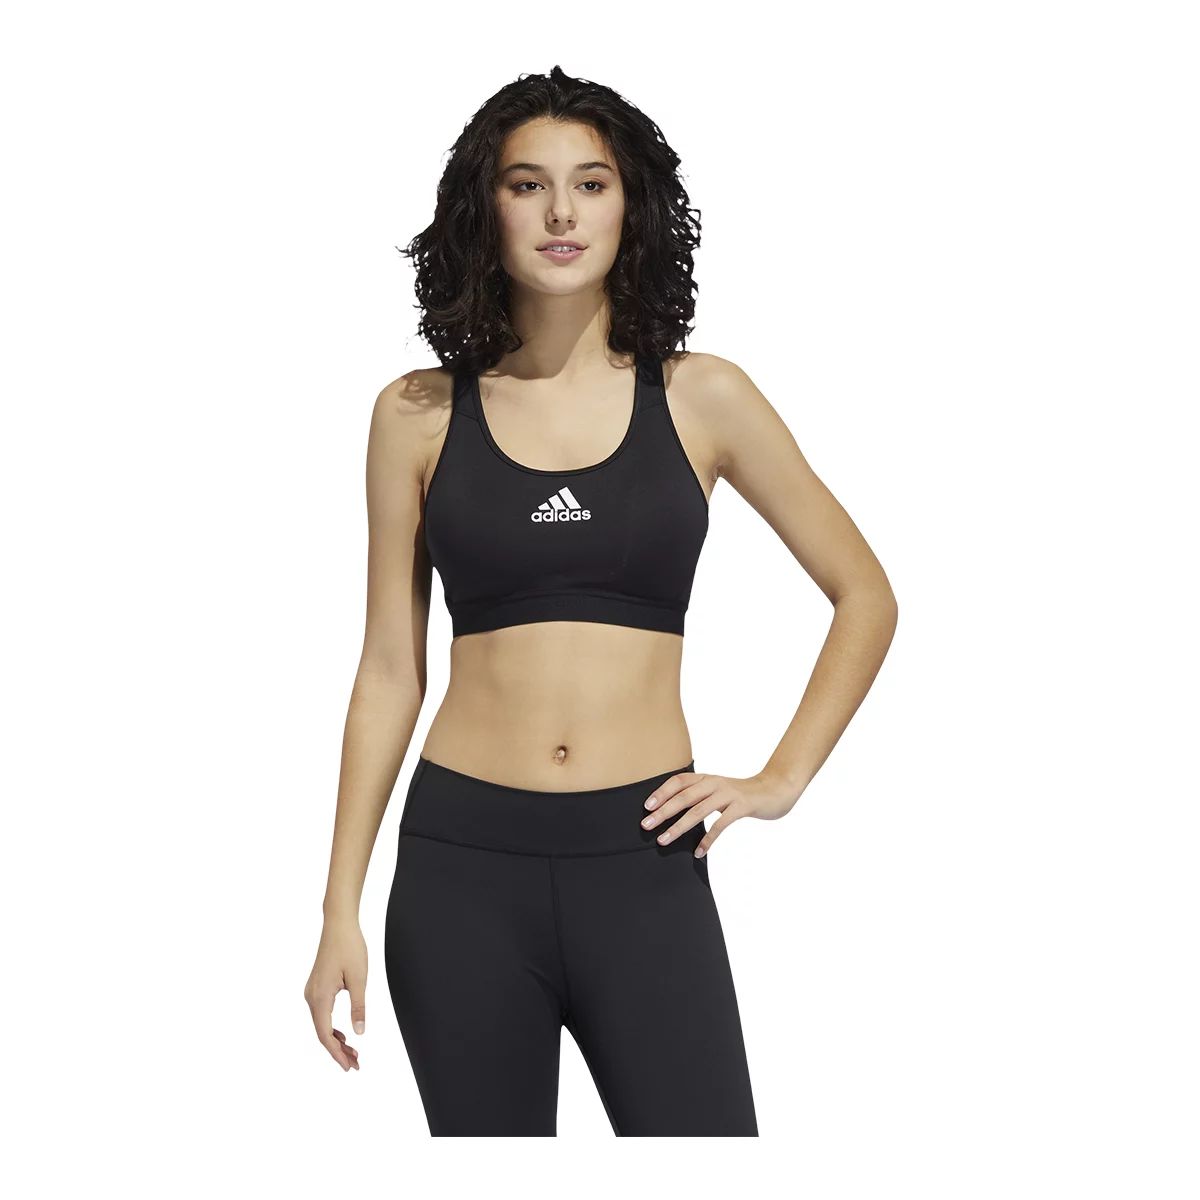 https://media-www.atmosphere.ca/product/div-03-softgoods/dpt-70-athletic-clothing/sdpt-02-womens/333070642/adidas-w-don-t-rest-alphaskin-black-white-xs--0dac6220-f048-4c66-bf03-4d9810ecf110-jpgrendition.jpg